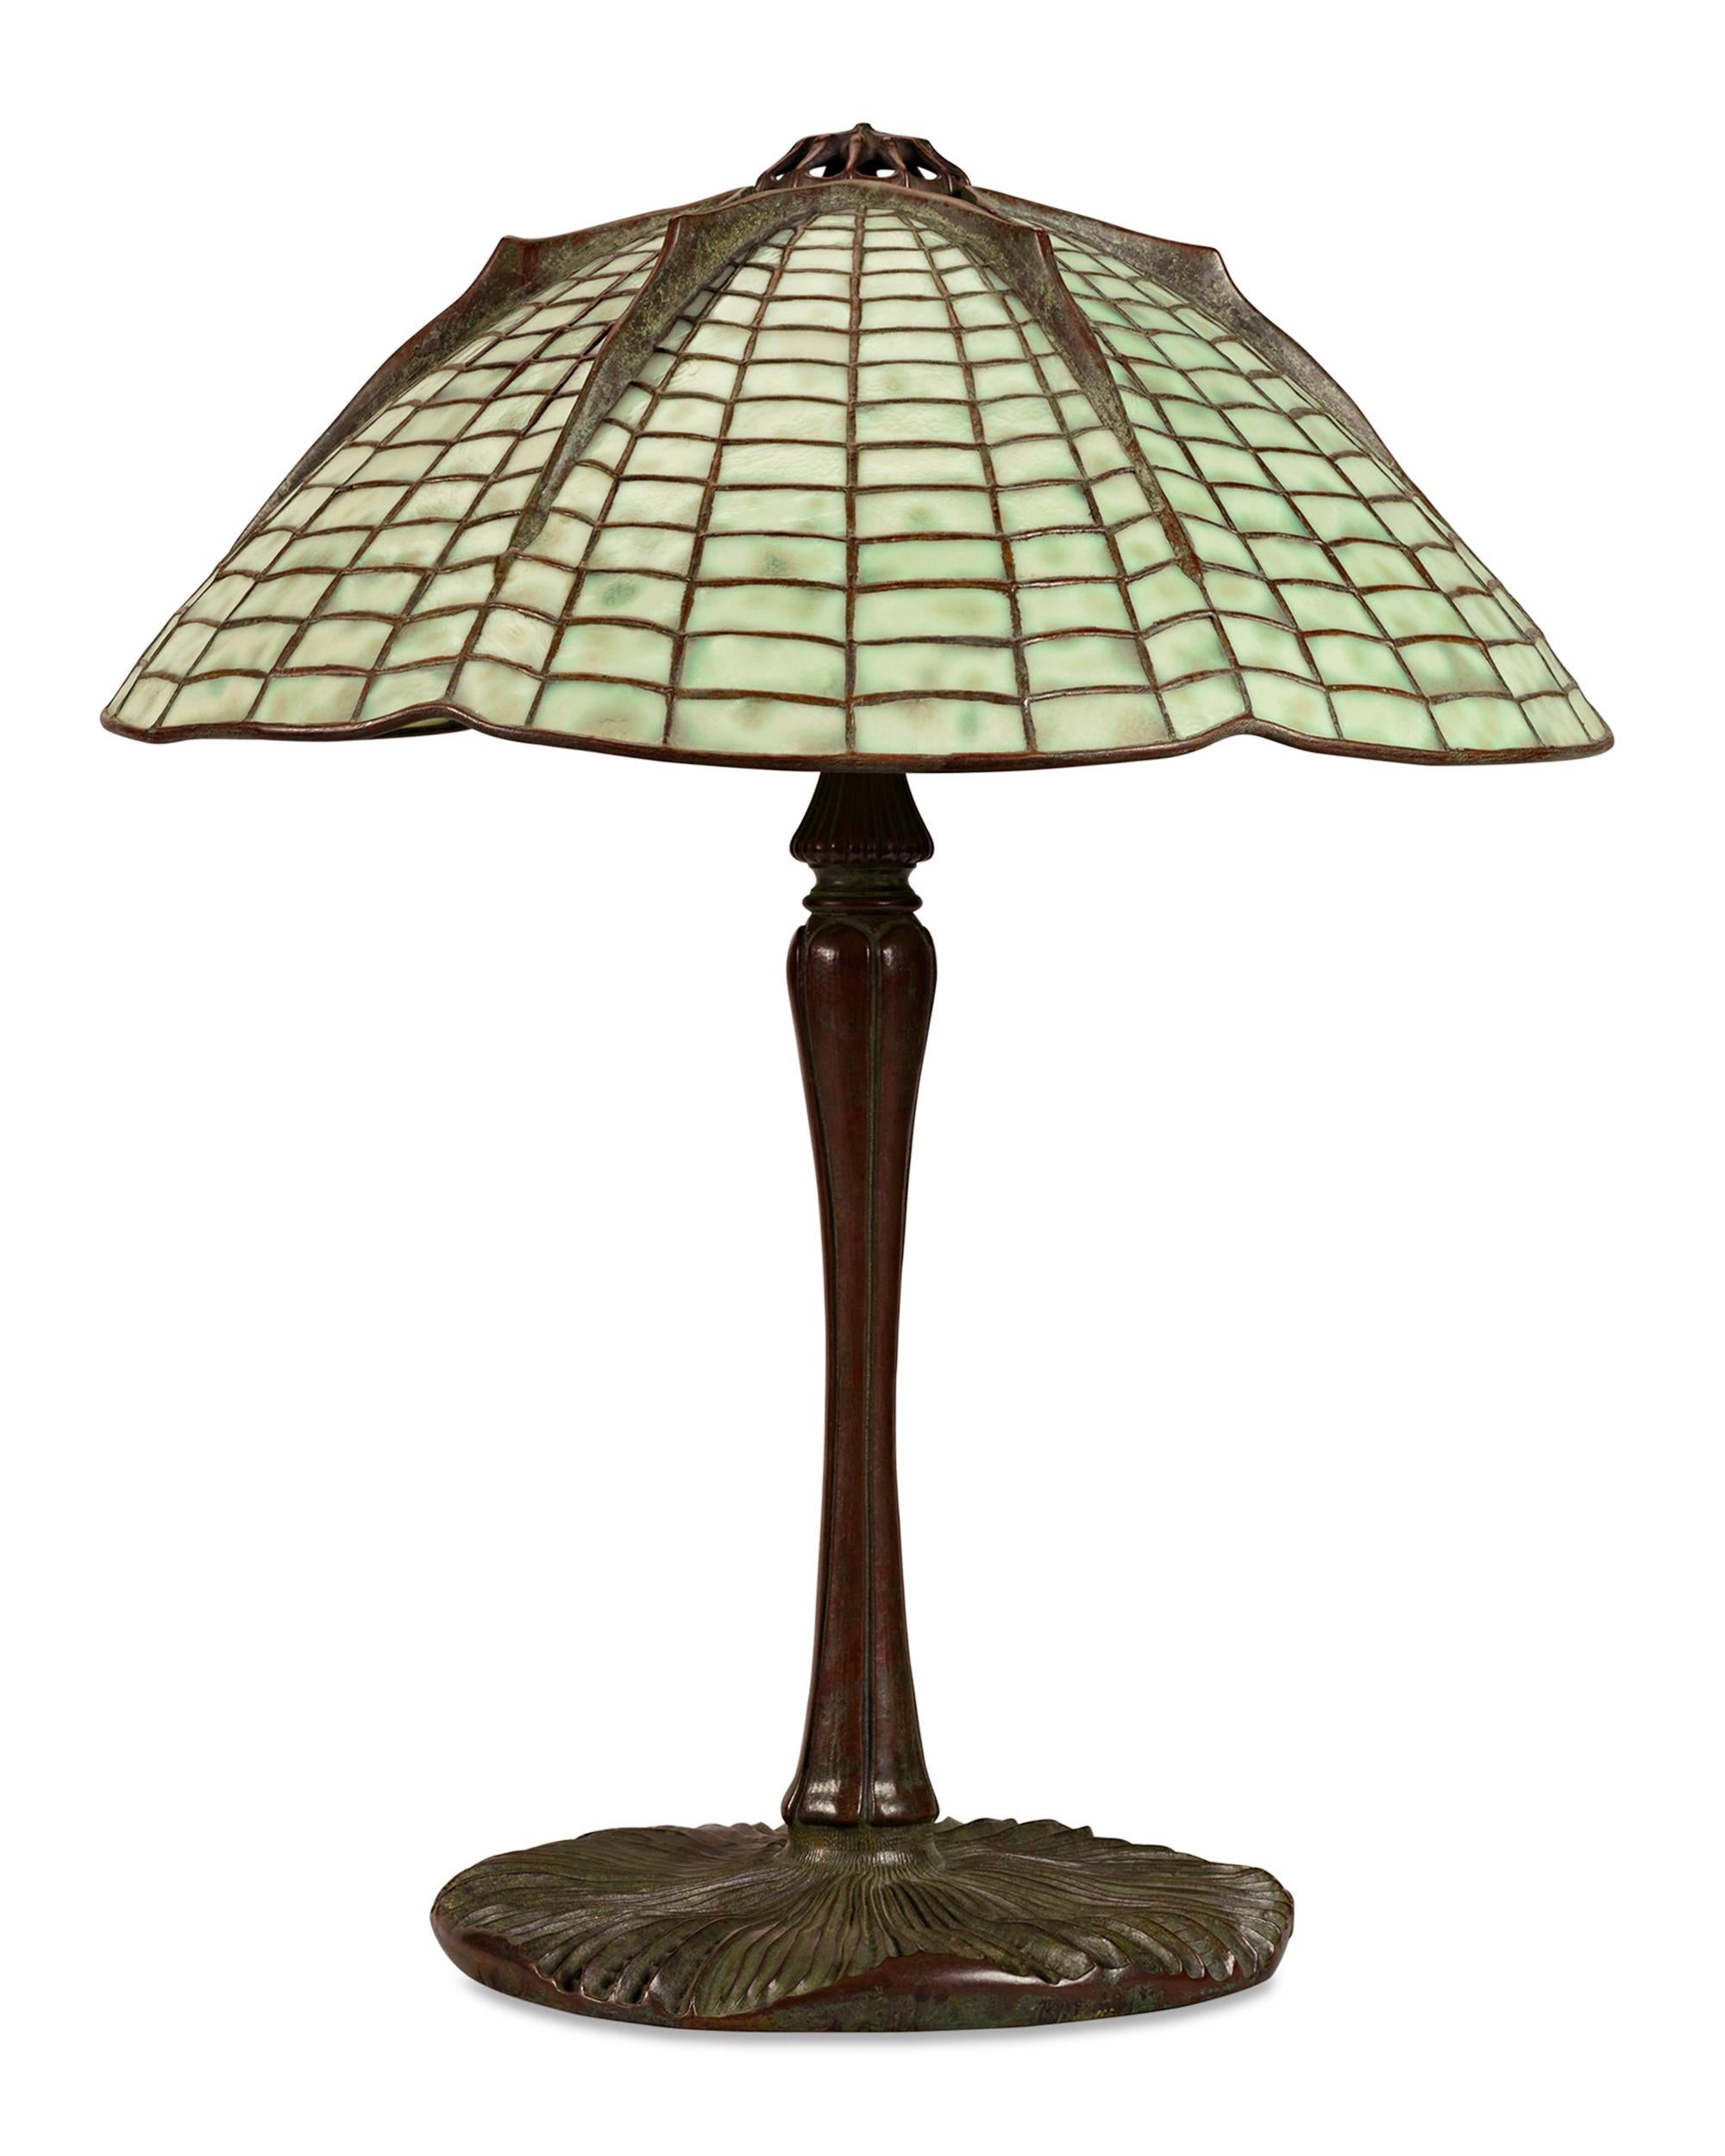 This Tiffany Studios geometric leaded glass and bronze table lamp features the iconic Spider shade and its original complementary Mushroom bronze base. The unique form of the spider and web-inspired shade combines with the soft green and yellow